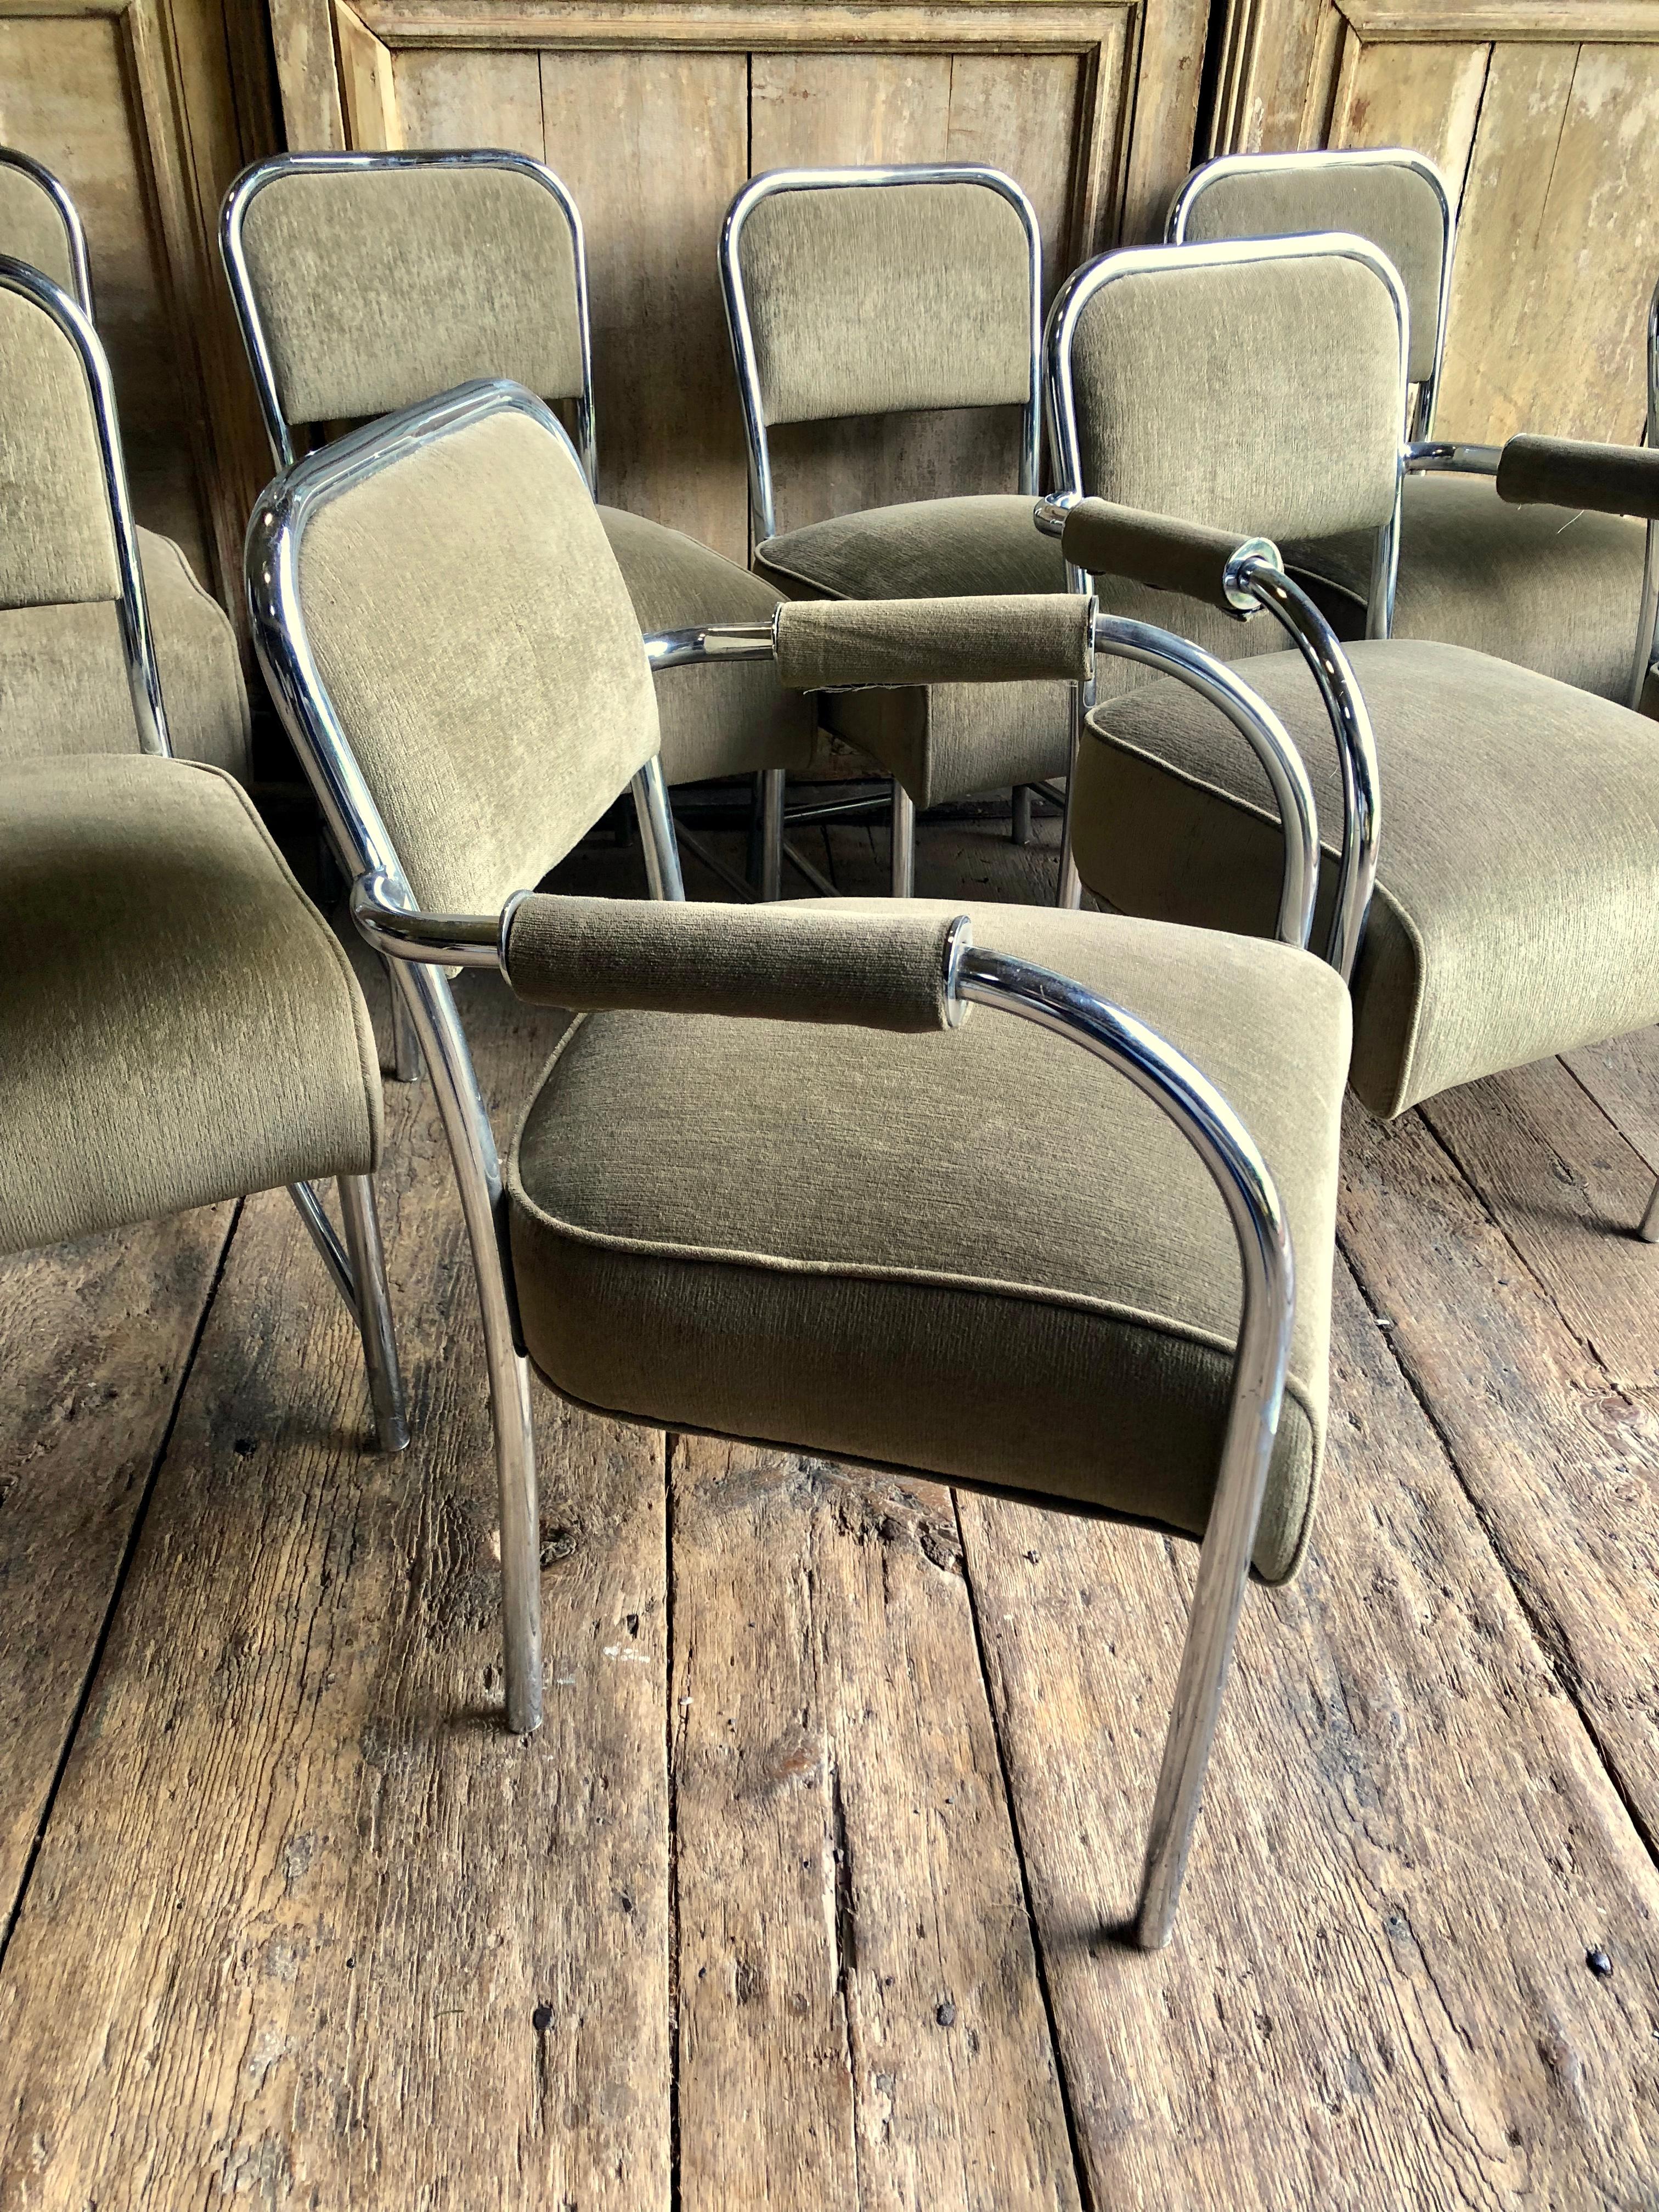 A set of eight (2 armchairs - 6 side chairs) chrome played tubular steel dining chairs with upholstered seats and backs, covered in a sage green velour fabric. The chairs are in the manner of Gilbert Rohde and date from the 1950s.